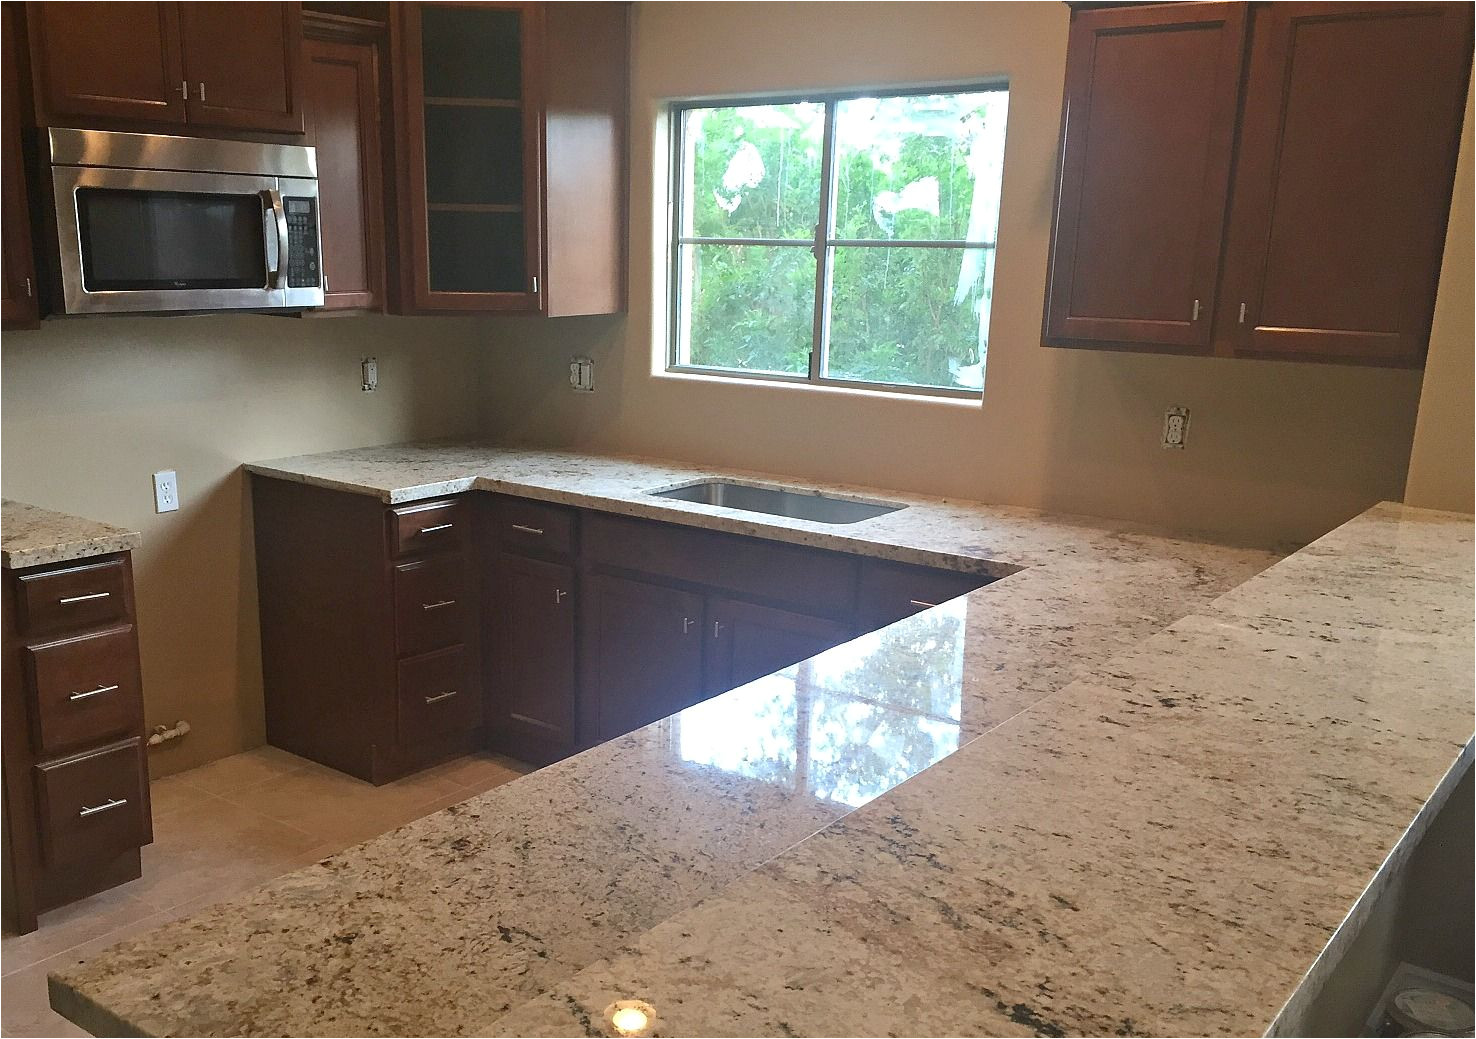 cafe creme granite countertop remodel in phoenix az with flat polish edge and stainless steel under mount sink having trouble deciding your countertop